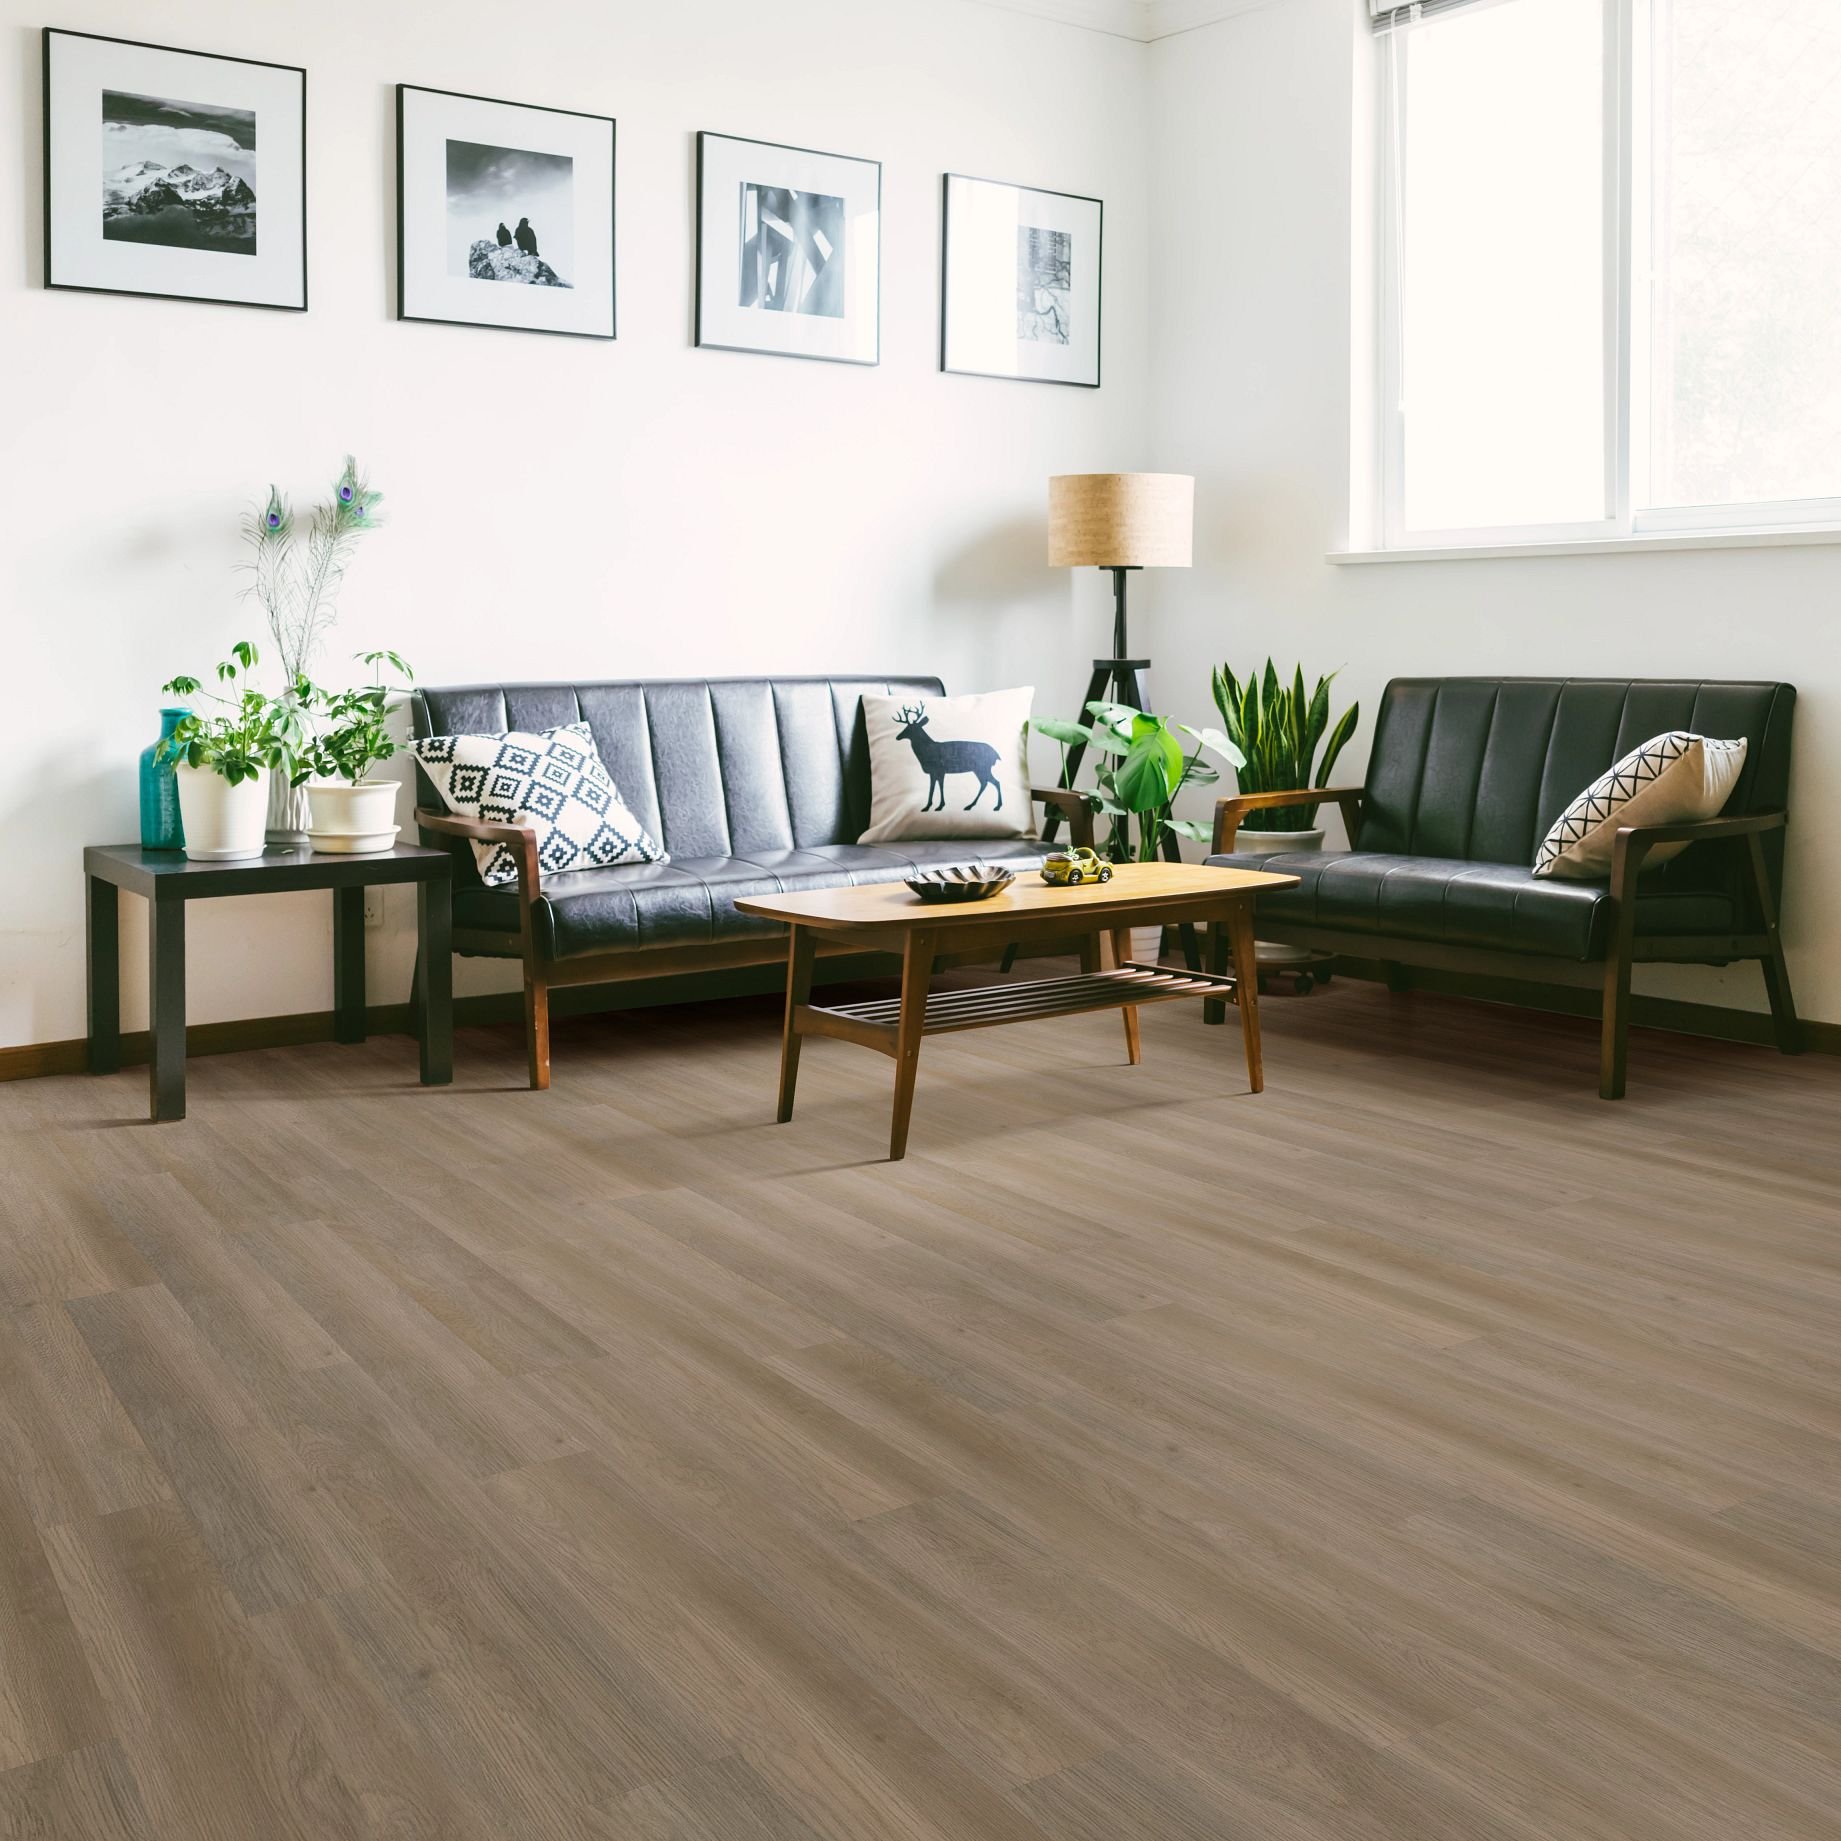 Floorte Vinyl Flooring From Shaw And Select Floors AB